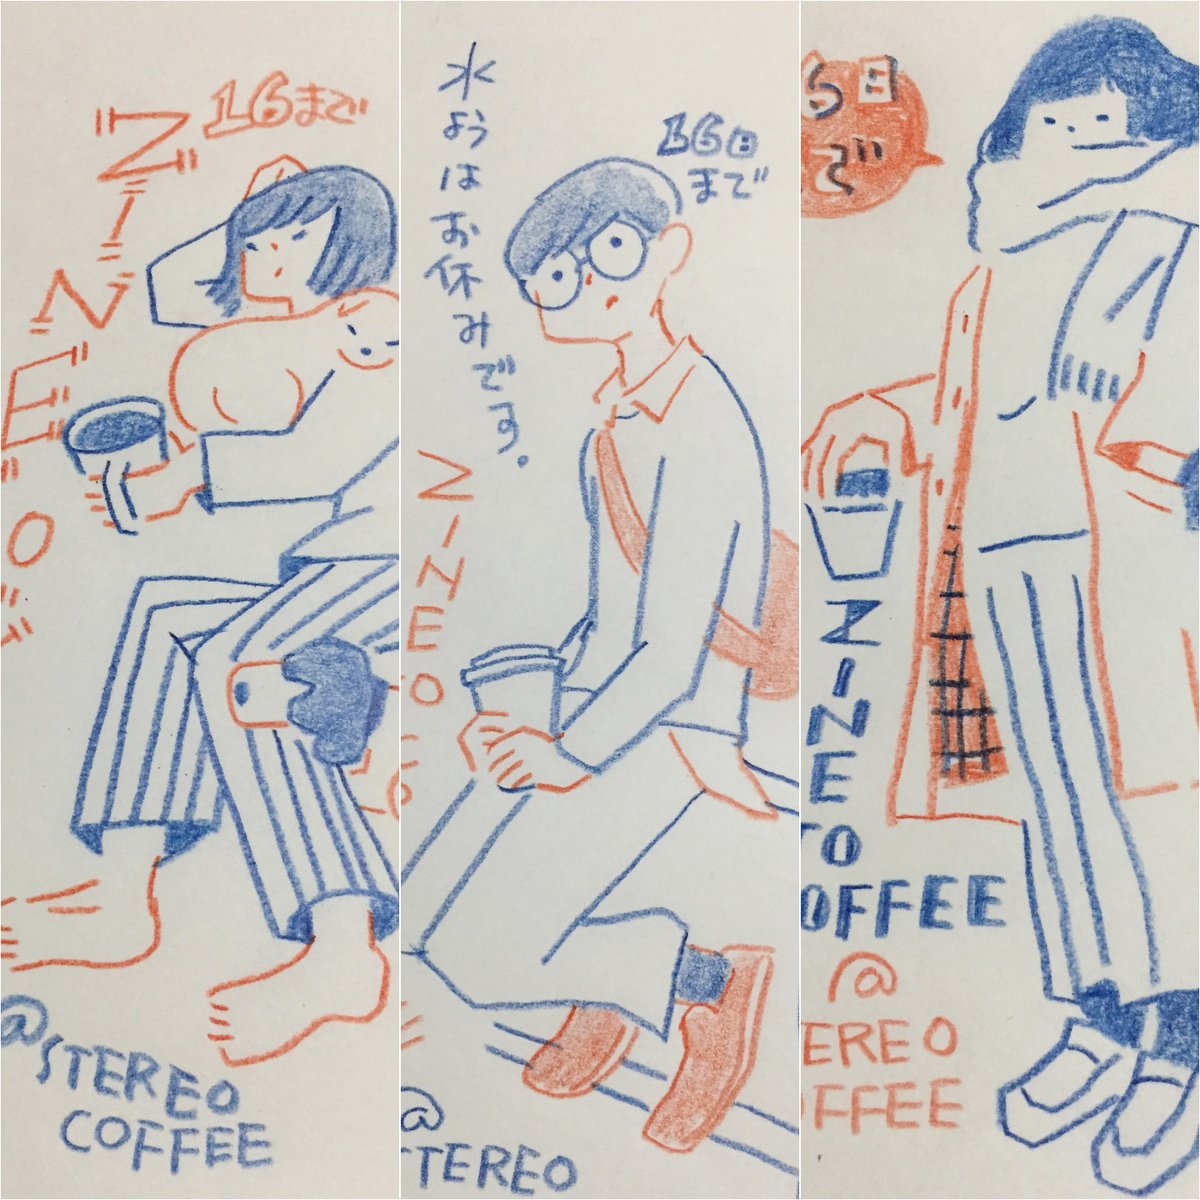 ZINE TO COFFEE
告知用イラスト
1/10〜1/16まとめ
※無事終了いたしました

お世話になりました
ありがとうございました。
STEREO COFFEE(福岡市中央区渡辺通3丁目8-3)
10:00-21:00 定休日 水曜日 